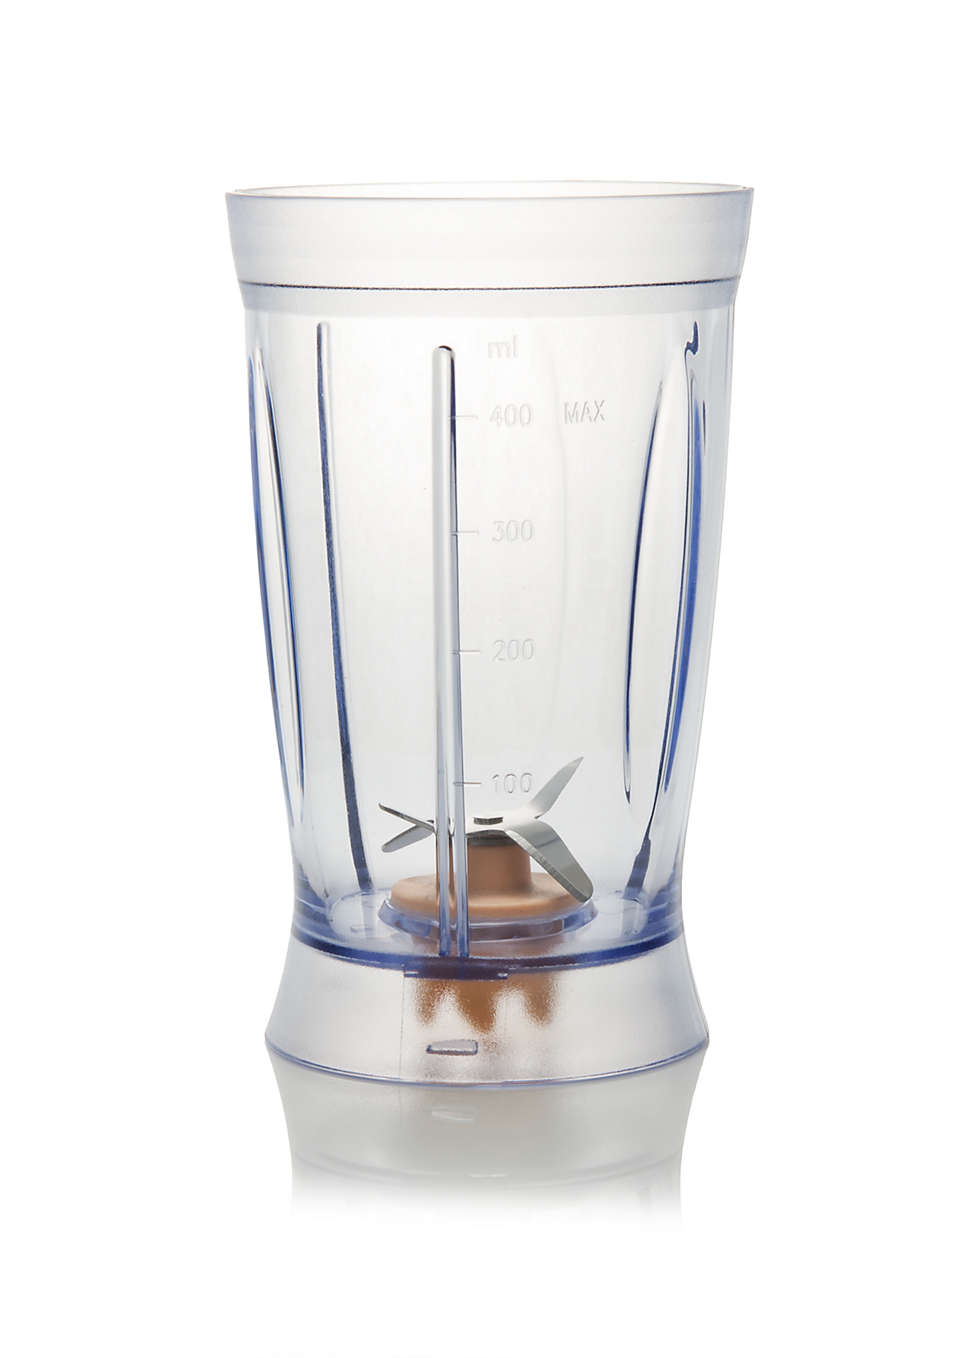 To replace your current Blender Jar.